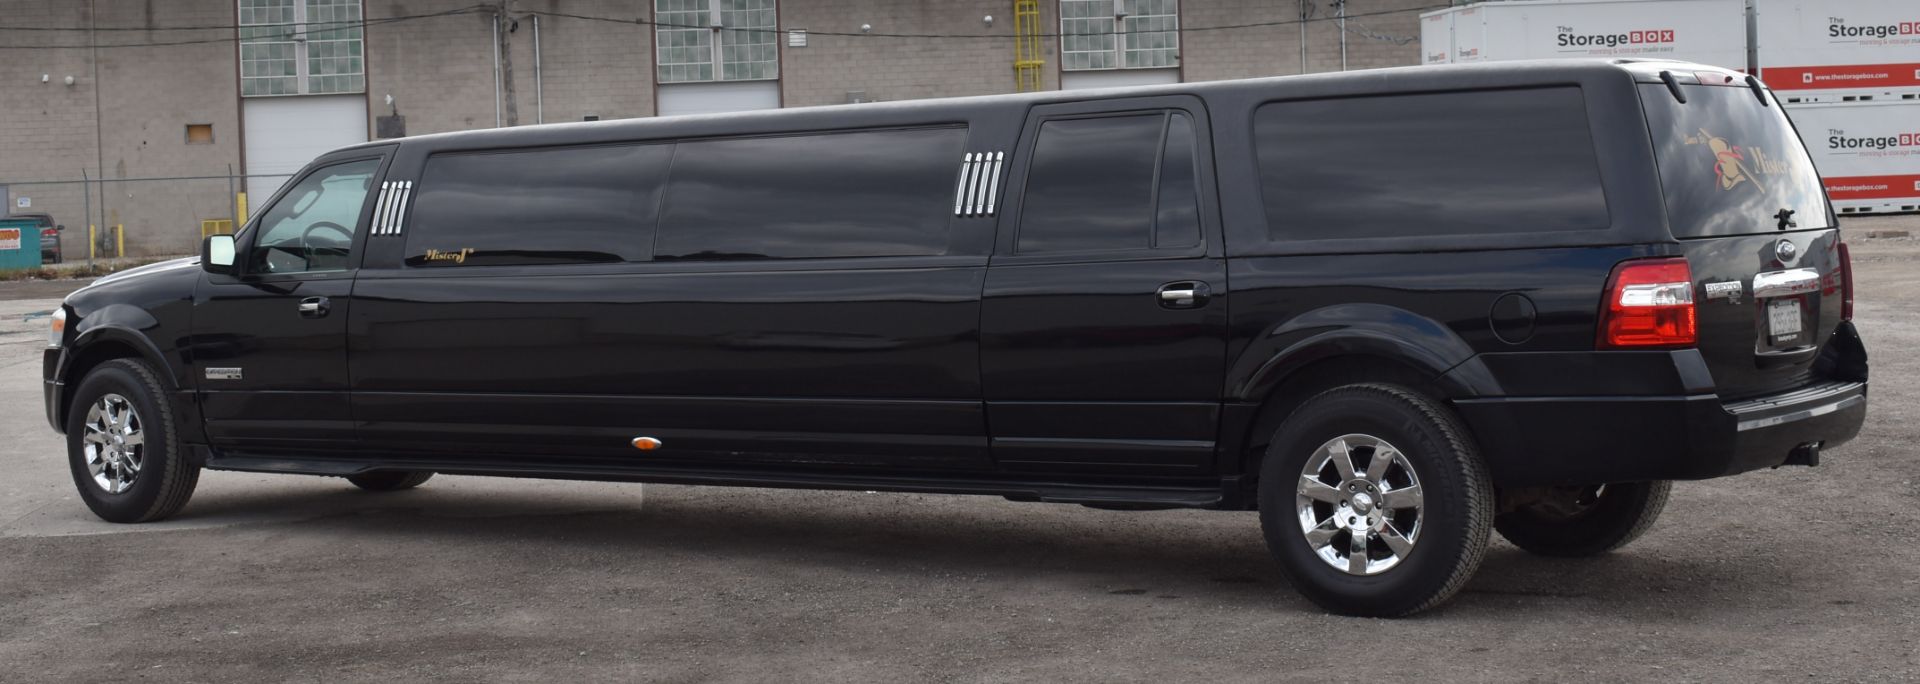 FORD (2008) EXPEDITION 14 PASSENGER STRETCH LIMOUSINE WITH 8 CYLINDER 5.4L GAS ENGINE, 177,845KM ( - Image 6 of 26